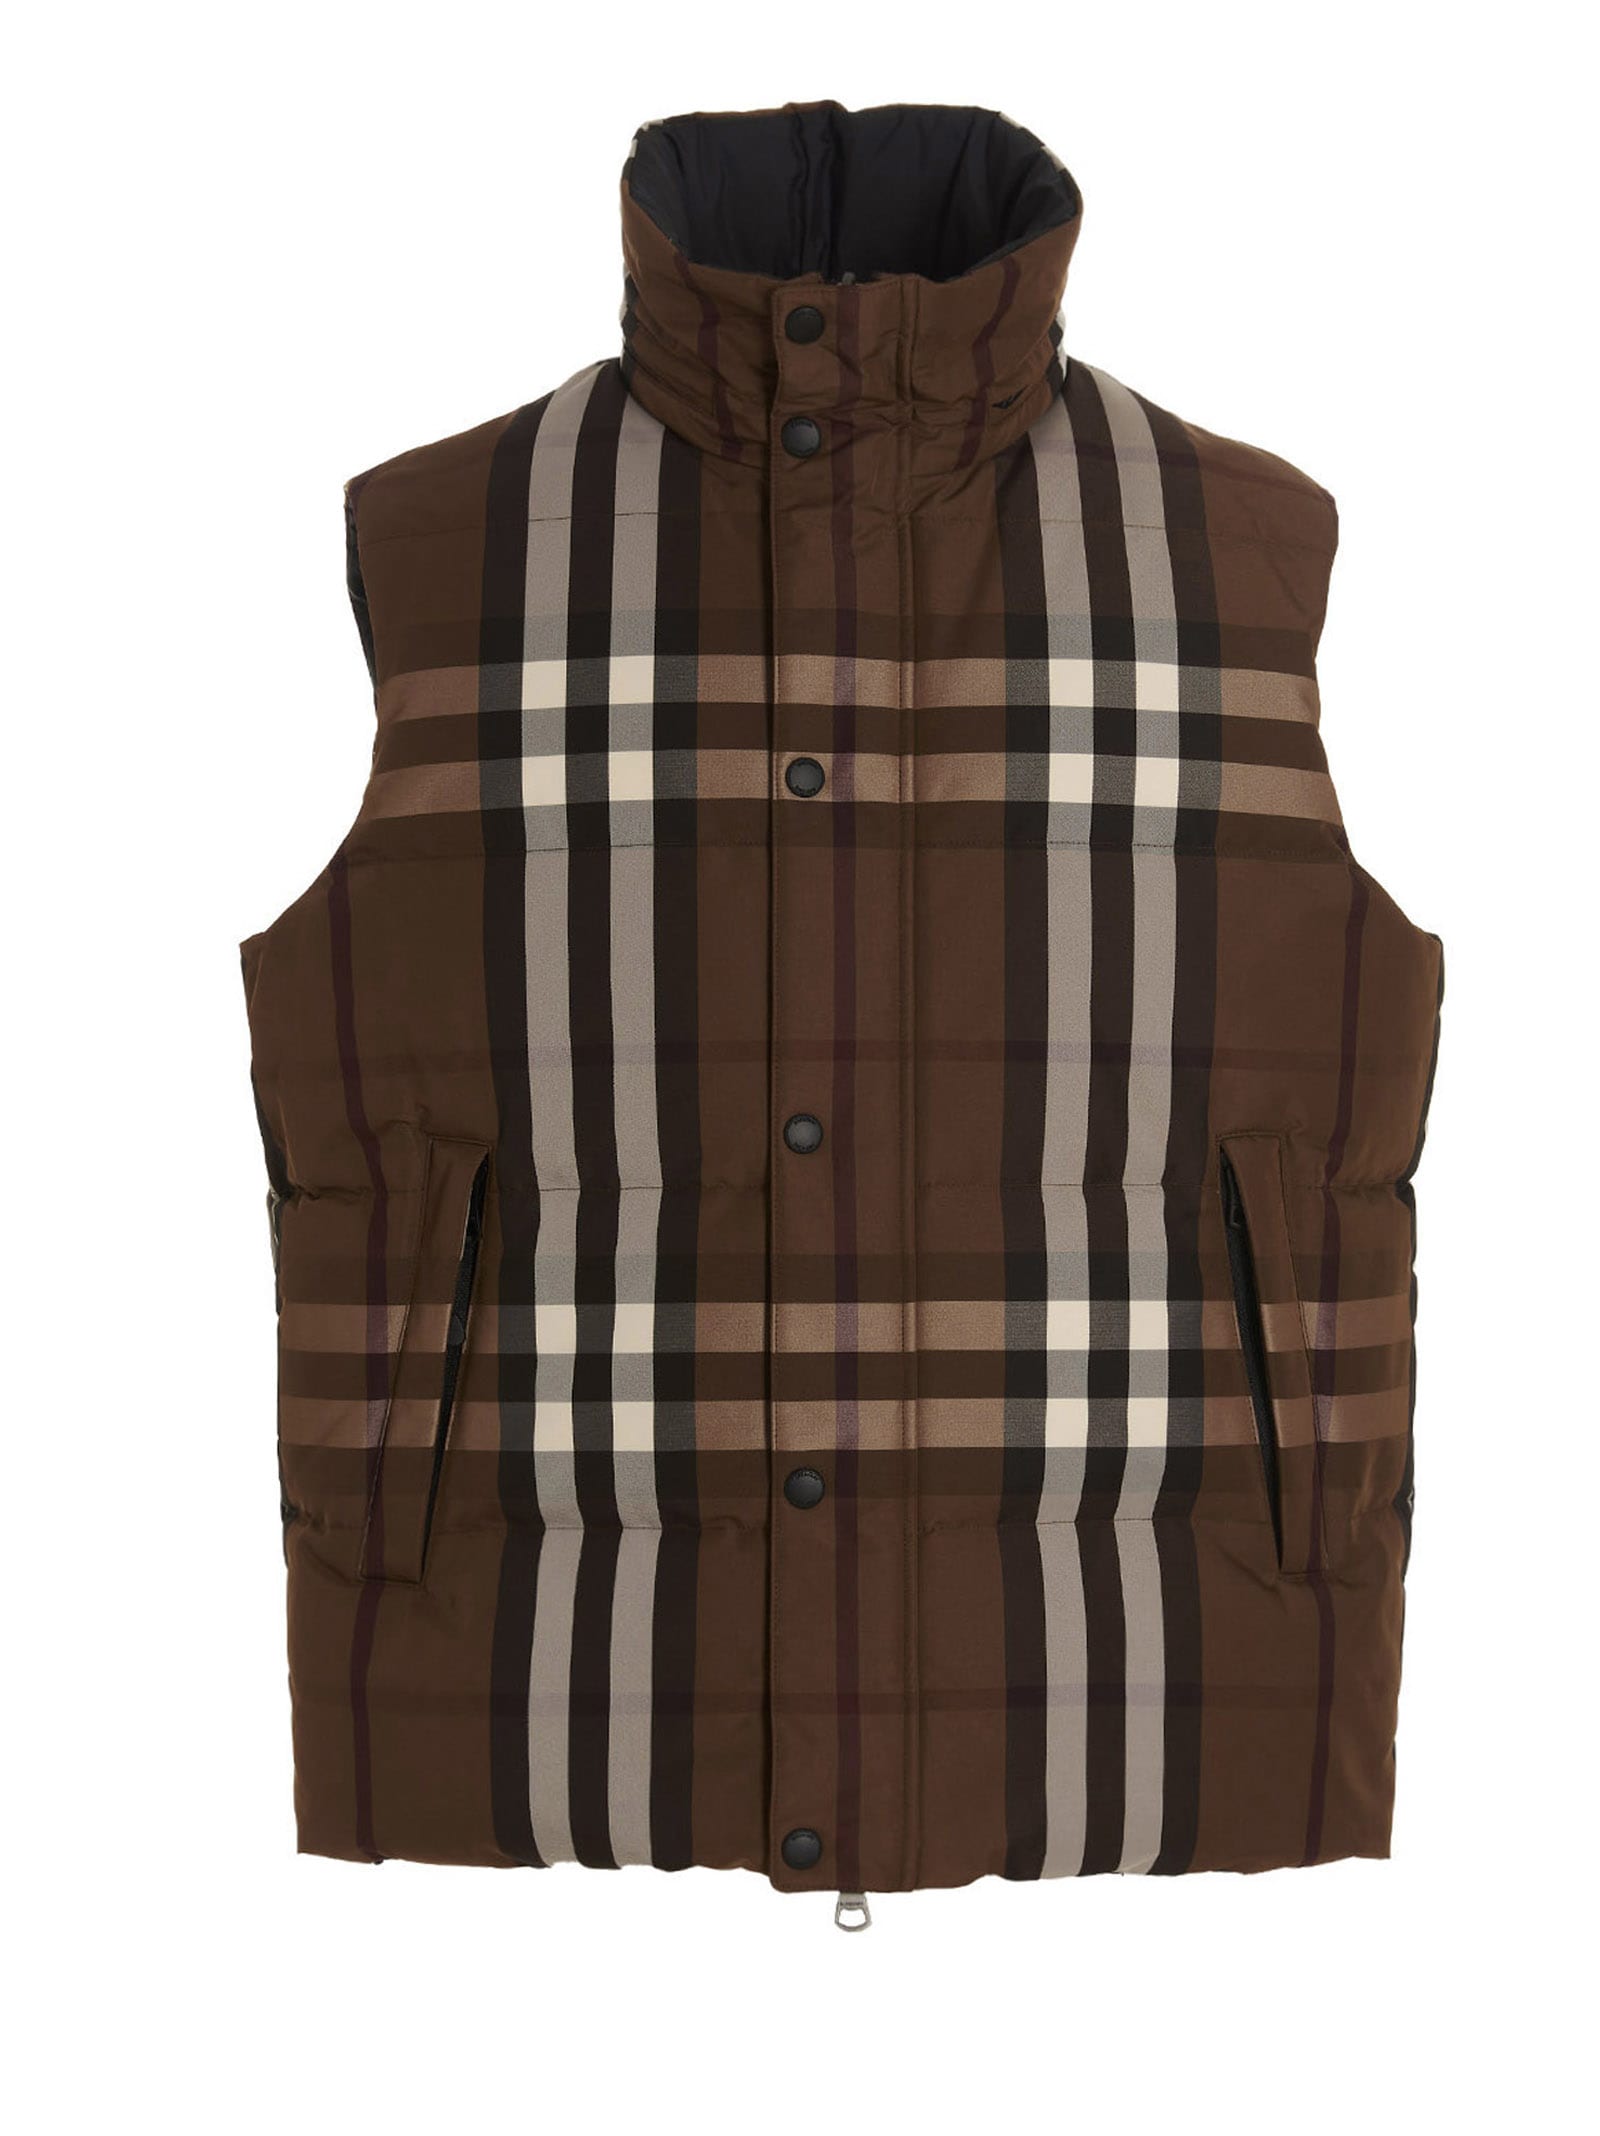 Burberry dowling Reversible Gilet